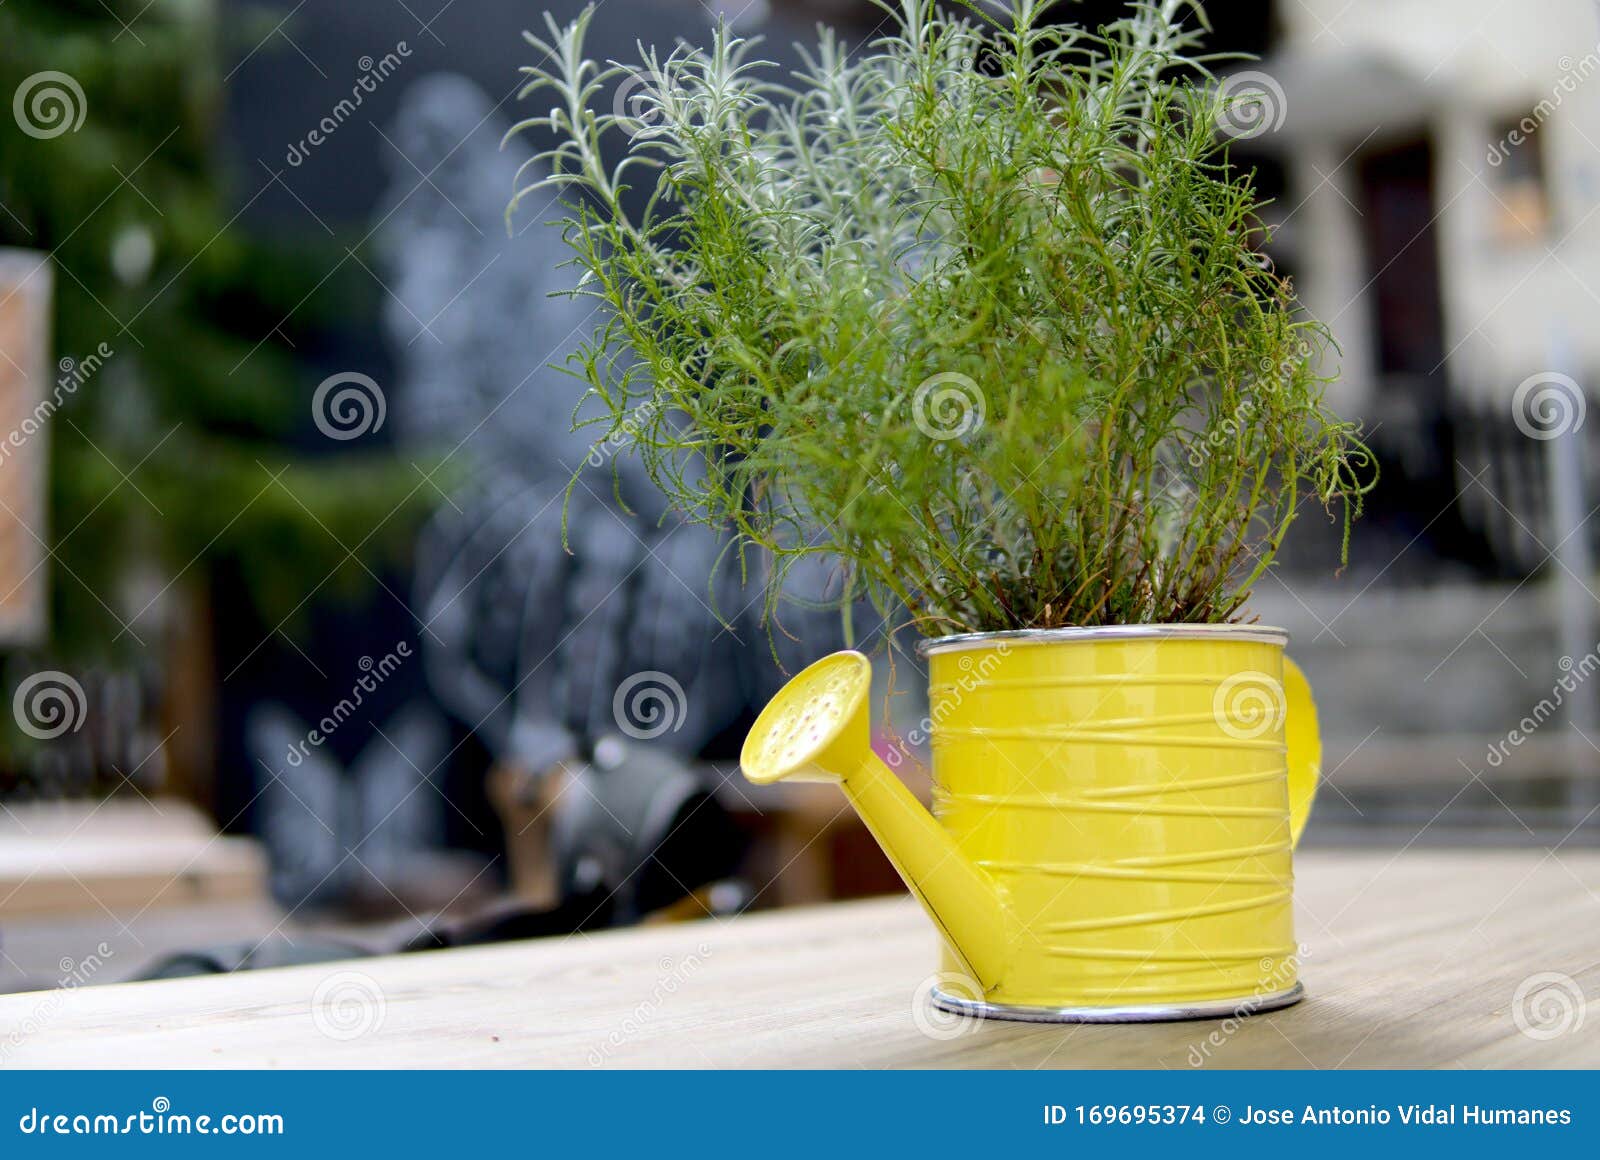 plant in watering can